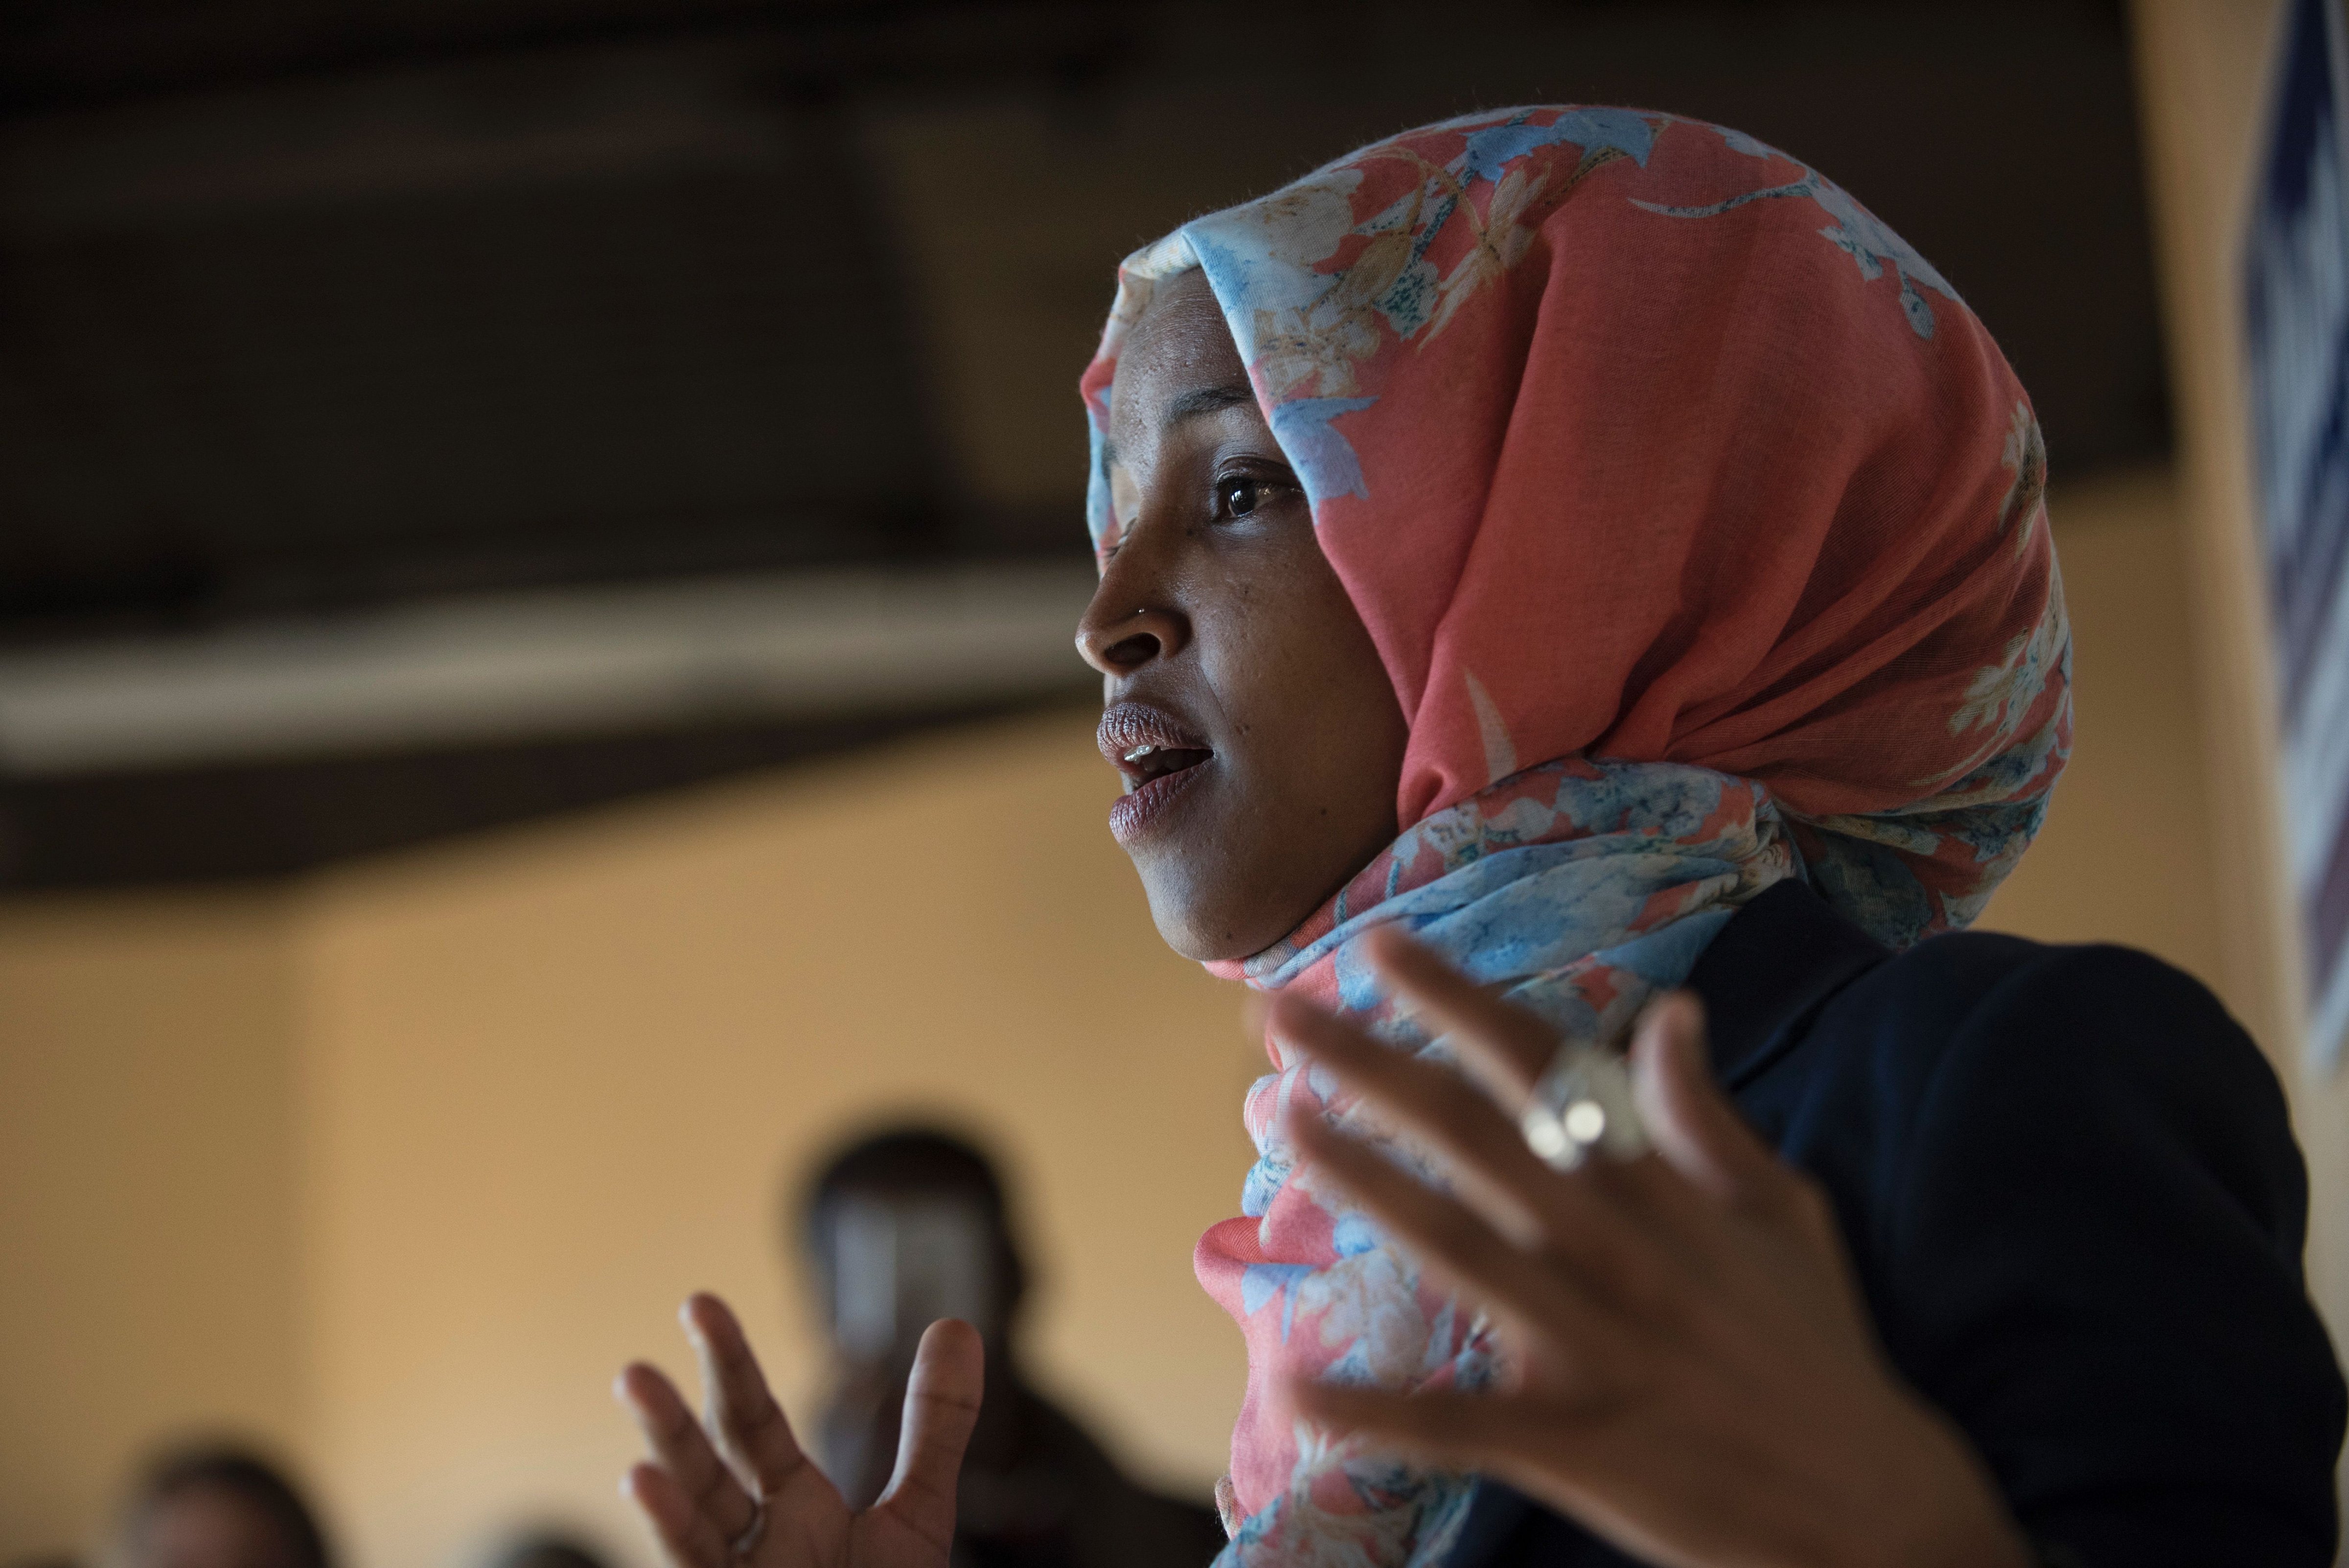 Ilhan Omar, candidate for State Representative for District 60B in Minnesota, speaks to a group of volunteers on Election Day, November 8, 2016 in Minneapolis, Minnesota.
                      Omar, a refugee from Somalia, would be the first Somali-American Muslim woman if elected. / AFP / STEPHEN MATUREN        (Photo credit should read STEPHEN MATUREN/AFP/Getty Images) (STEPHEN MATUREN—AFP/Getty Images)